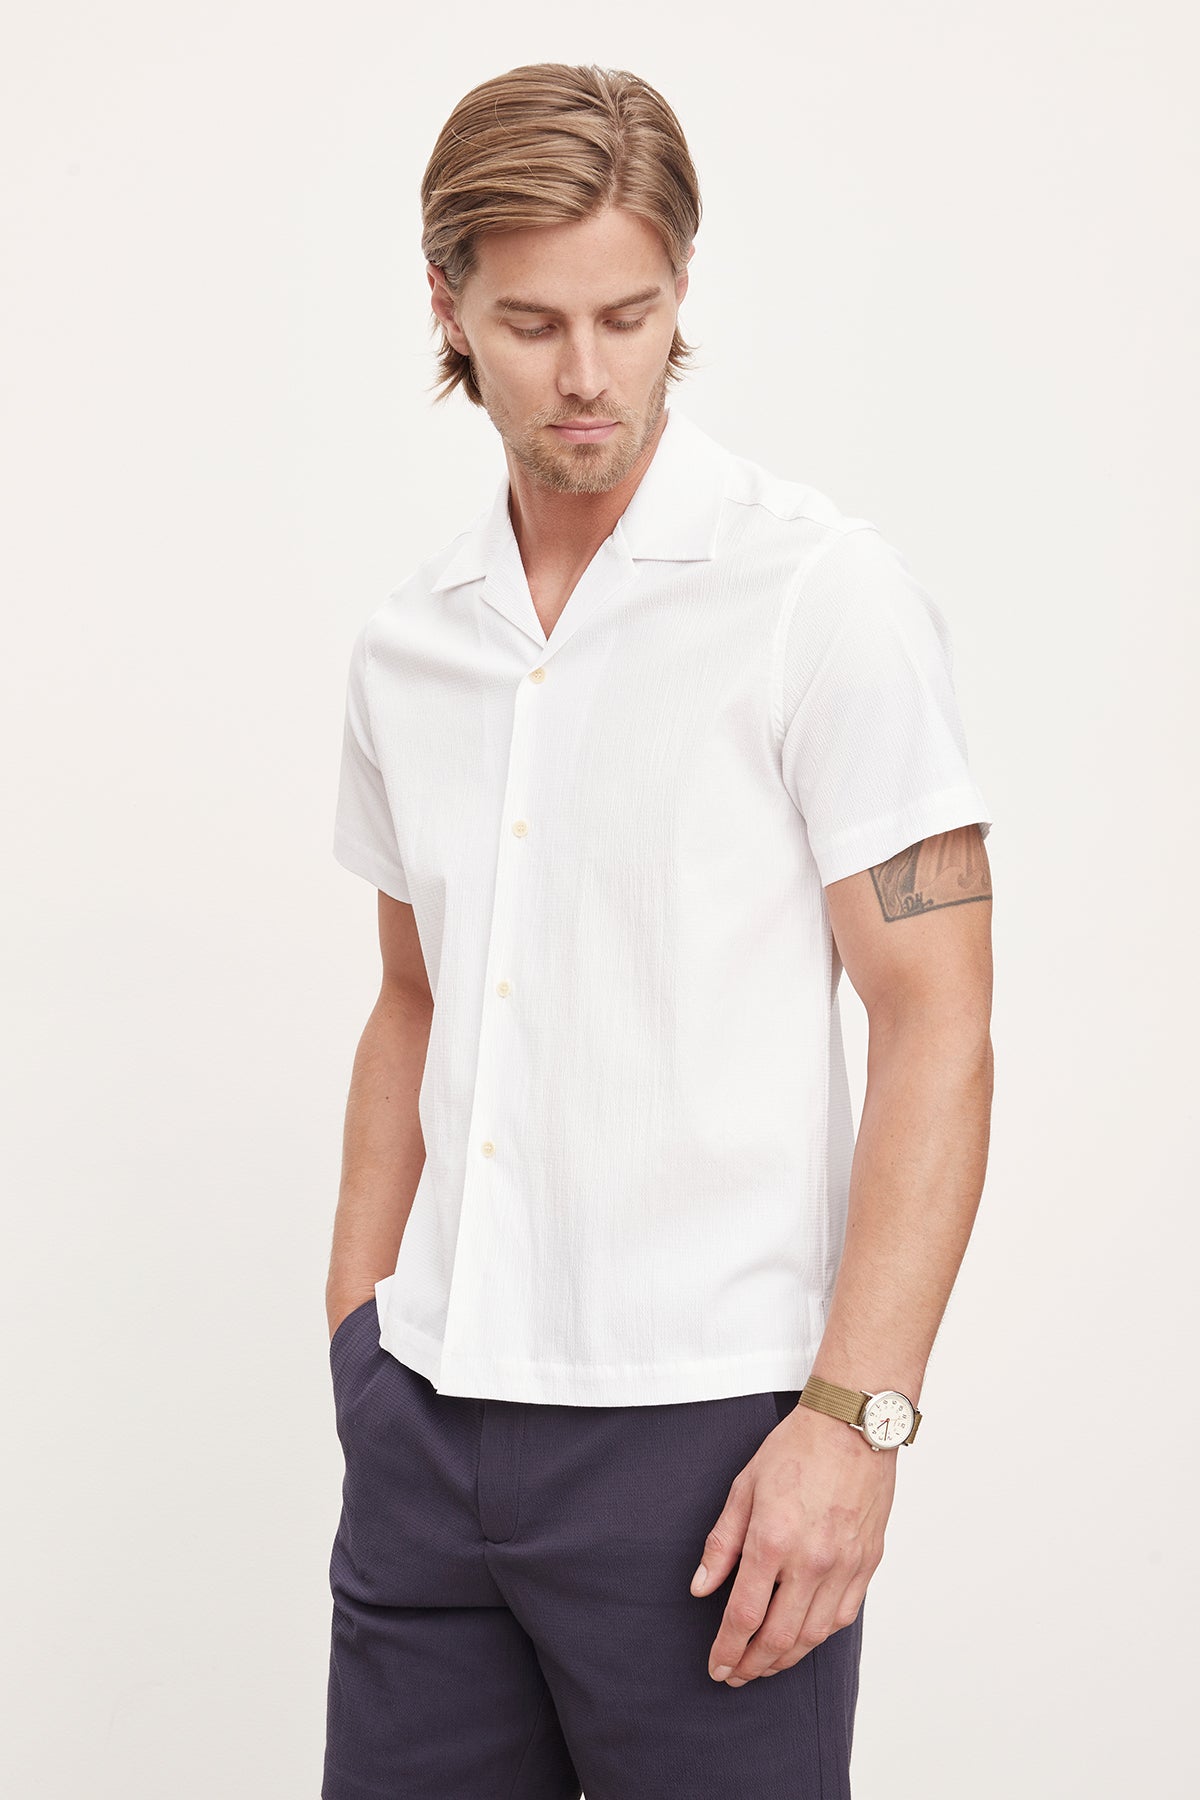   A man in a white short-sleeved Velvet by Graham & Spencer FRANK button-up shirt and dark pants, looking to the side with his hands in his pockets. 